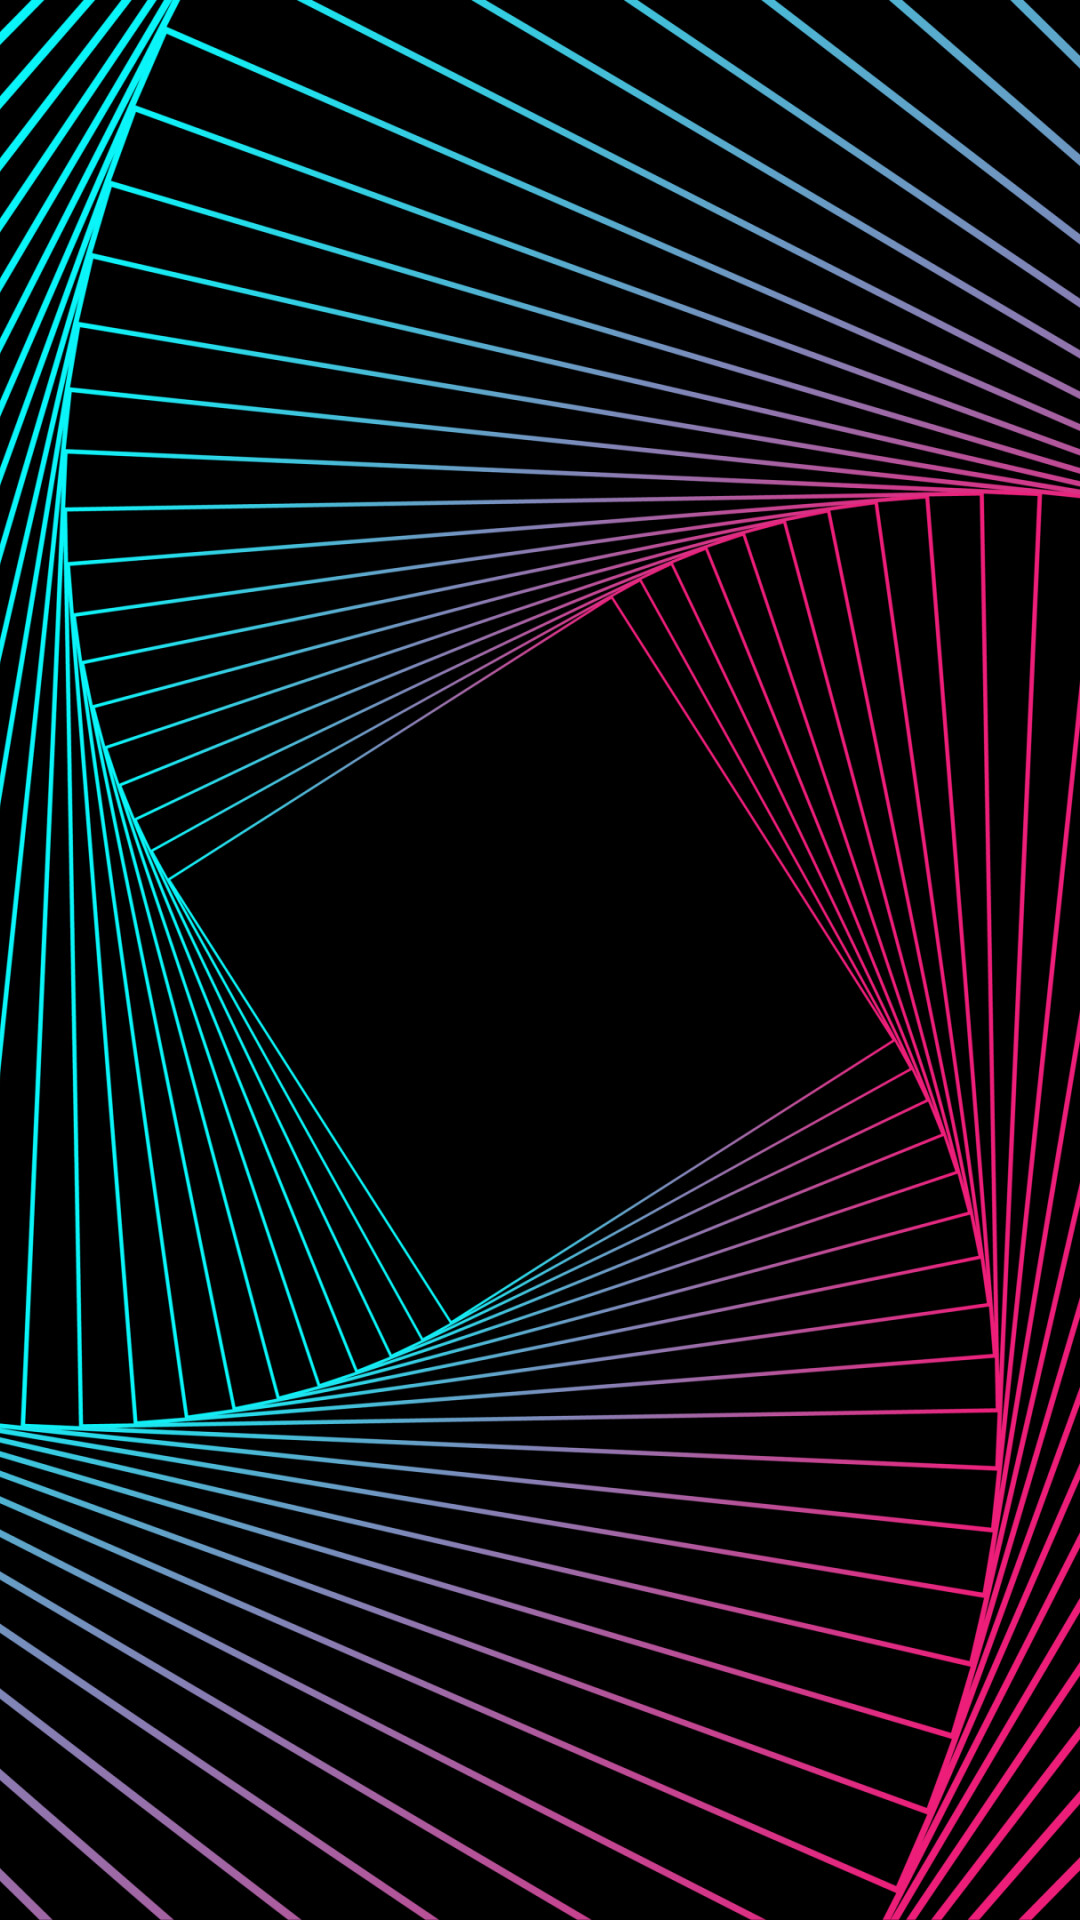 Geometry: Spiral, Neon, Gradient, Square, Lines, Swirl. 1080x1920 Full HD Background.